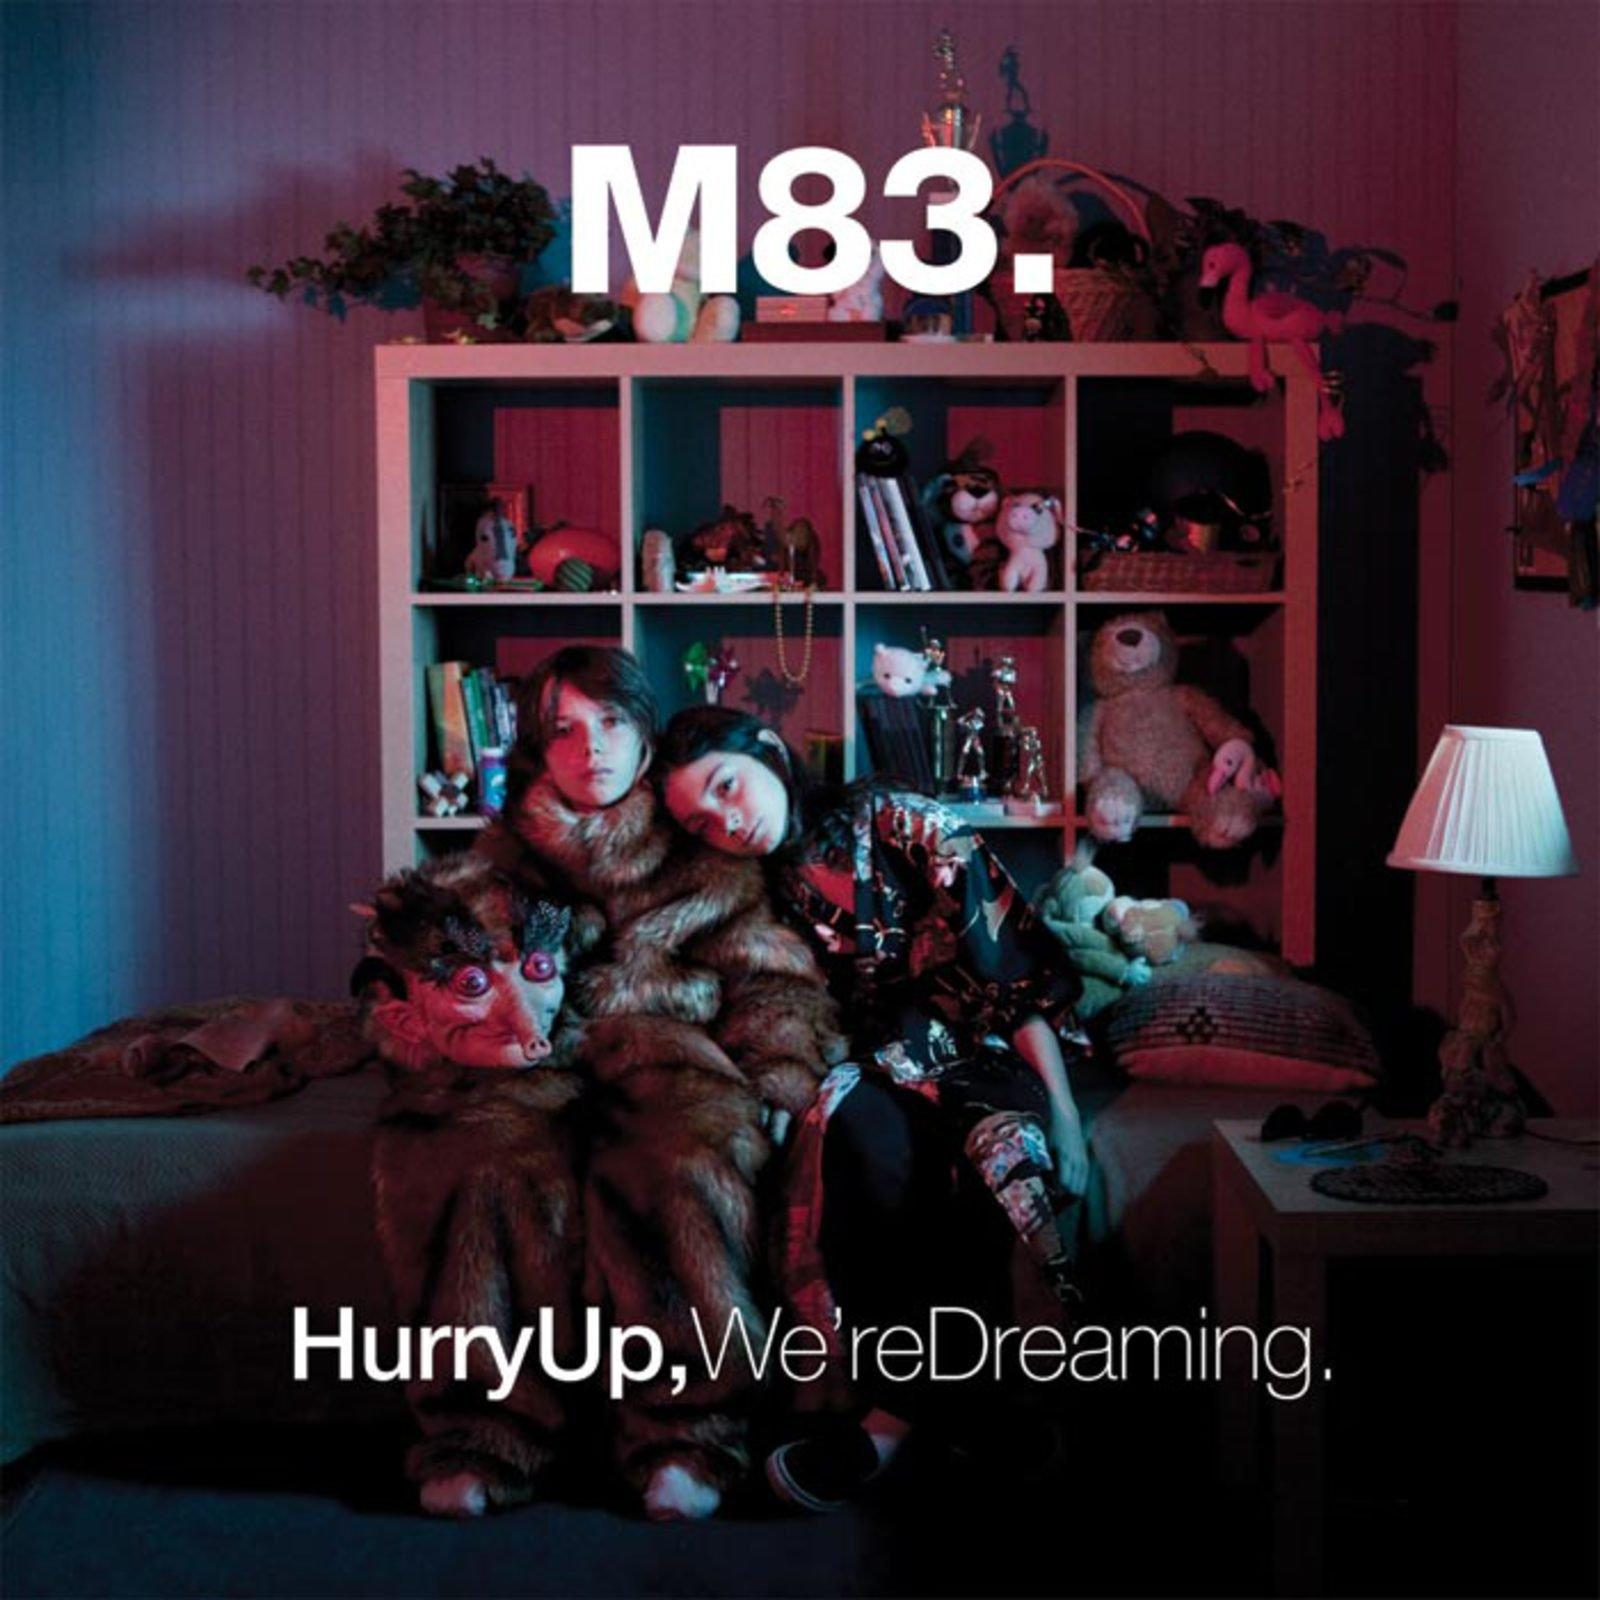 M83 - Hurry - Dreaming Up, We\'re (CD)